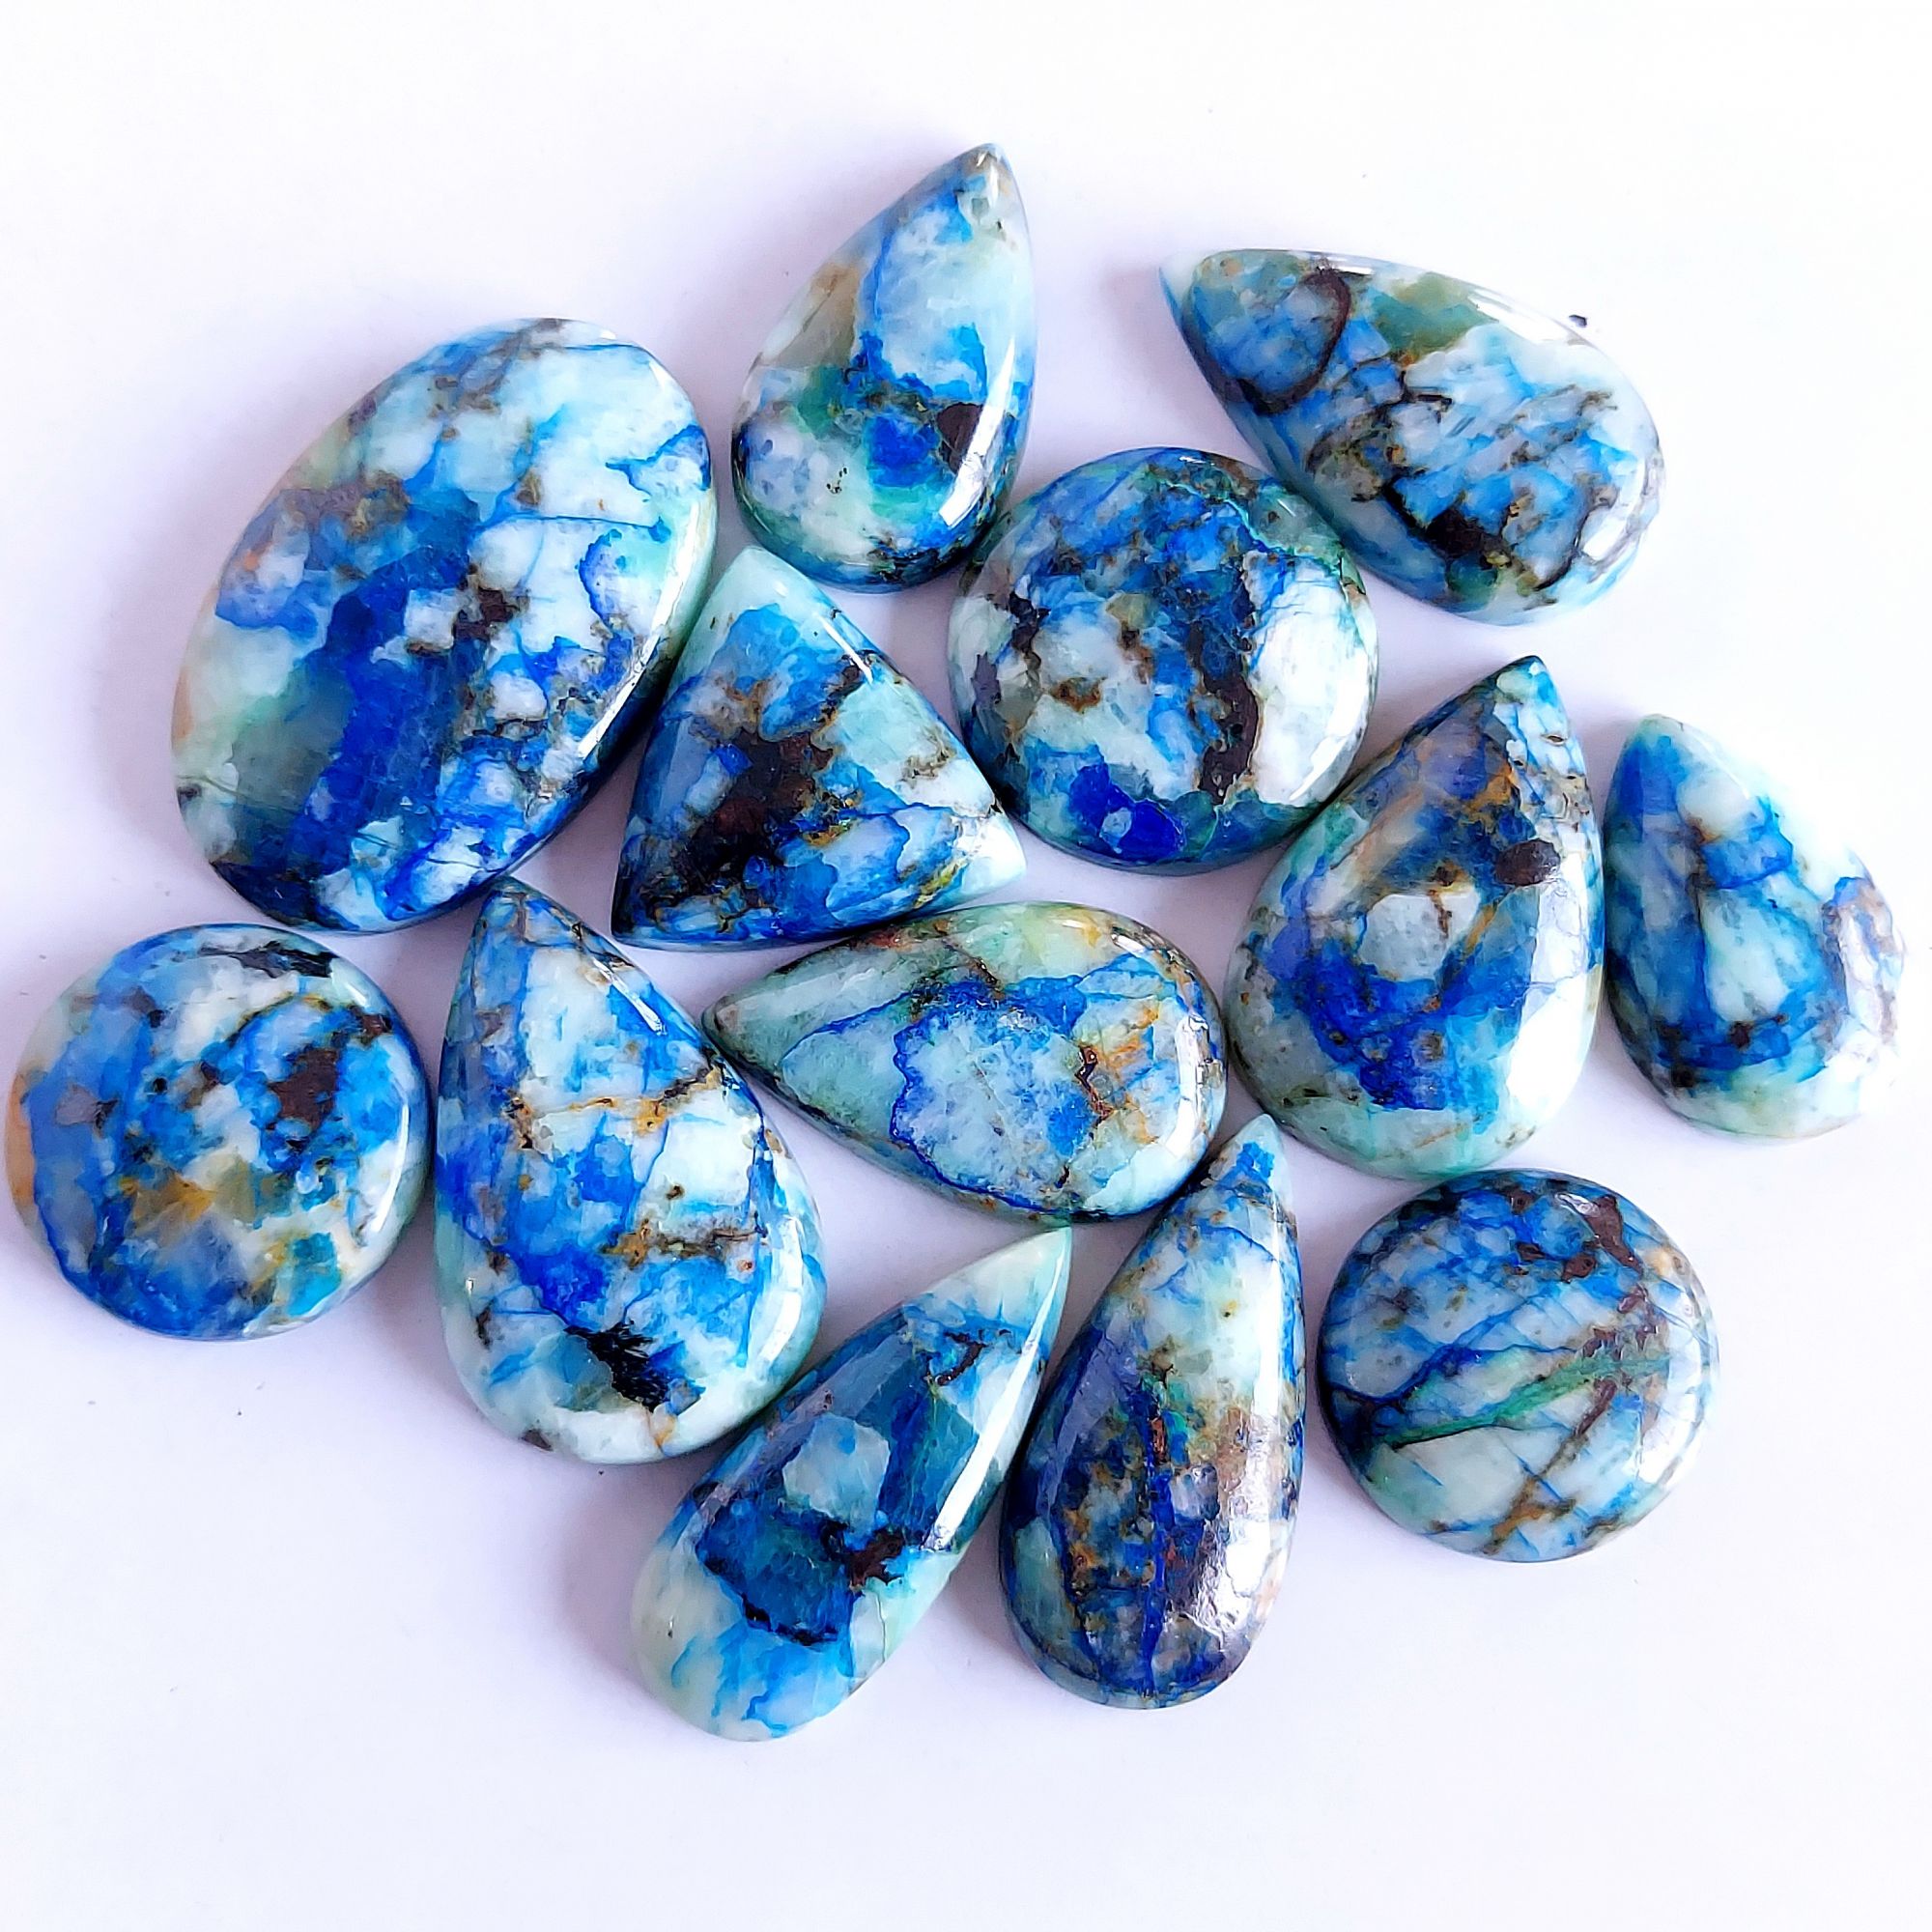 367.Cts 13 Pcs Natural Smooth Azurite Mix Loose Gemstone Cabochon Lot Size 38x24 22x22mm Wholesale Gemstone For jewelry